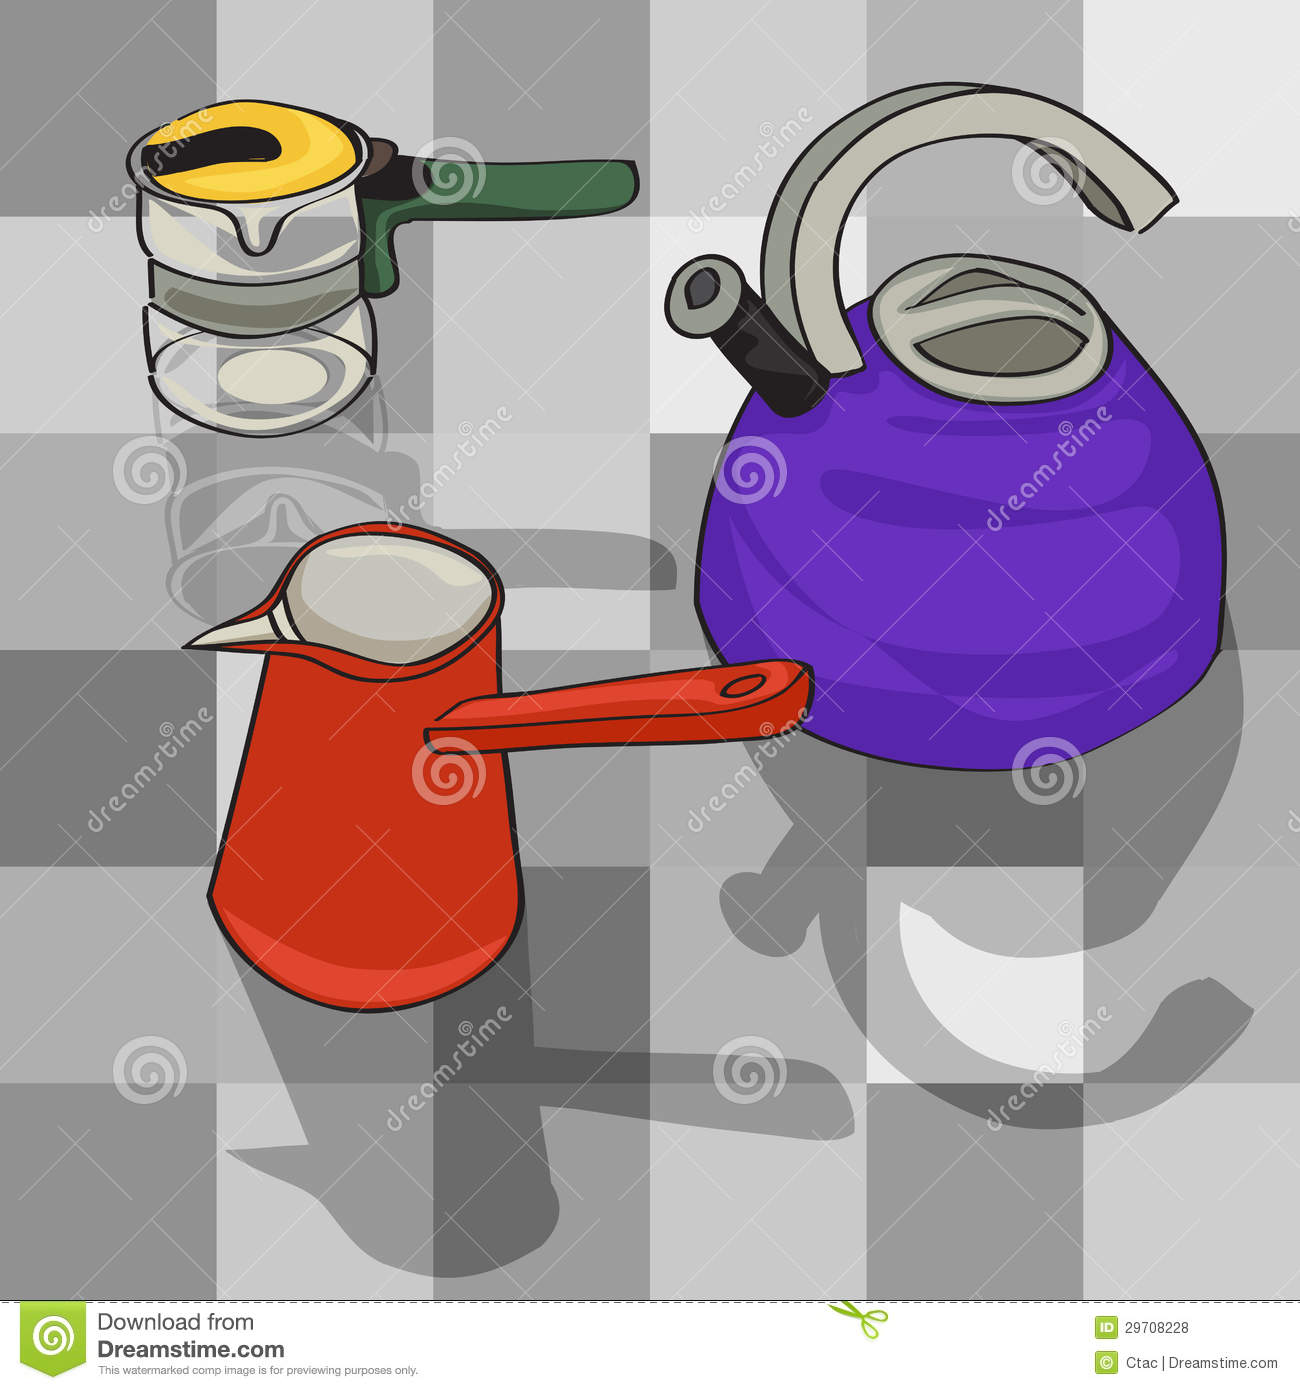 Hand Drawn Illustration Of A Collection Of Kitchen Kettles Group Of